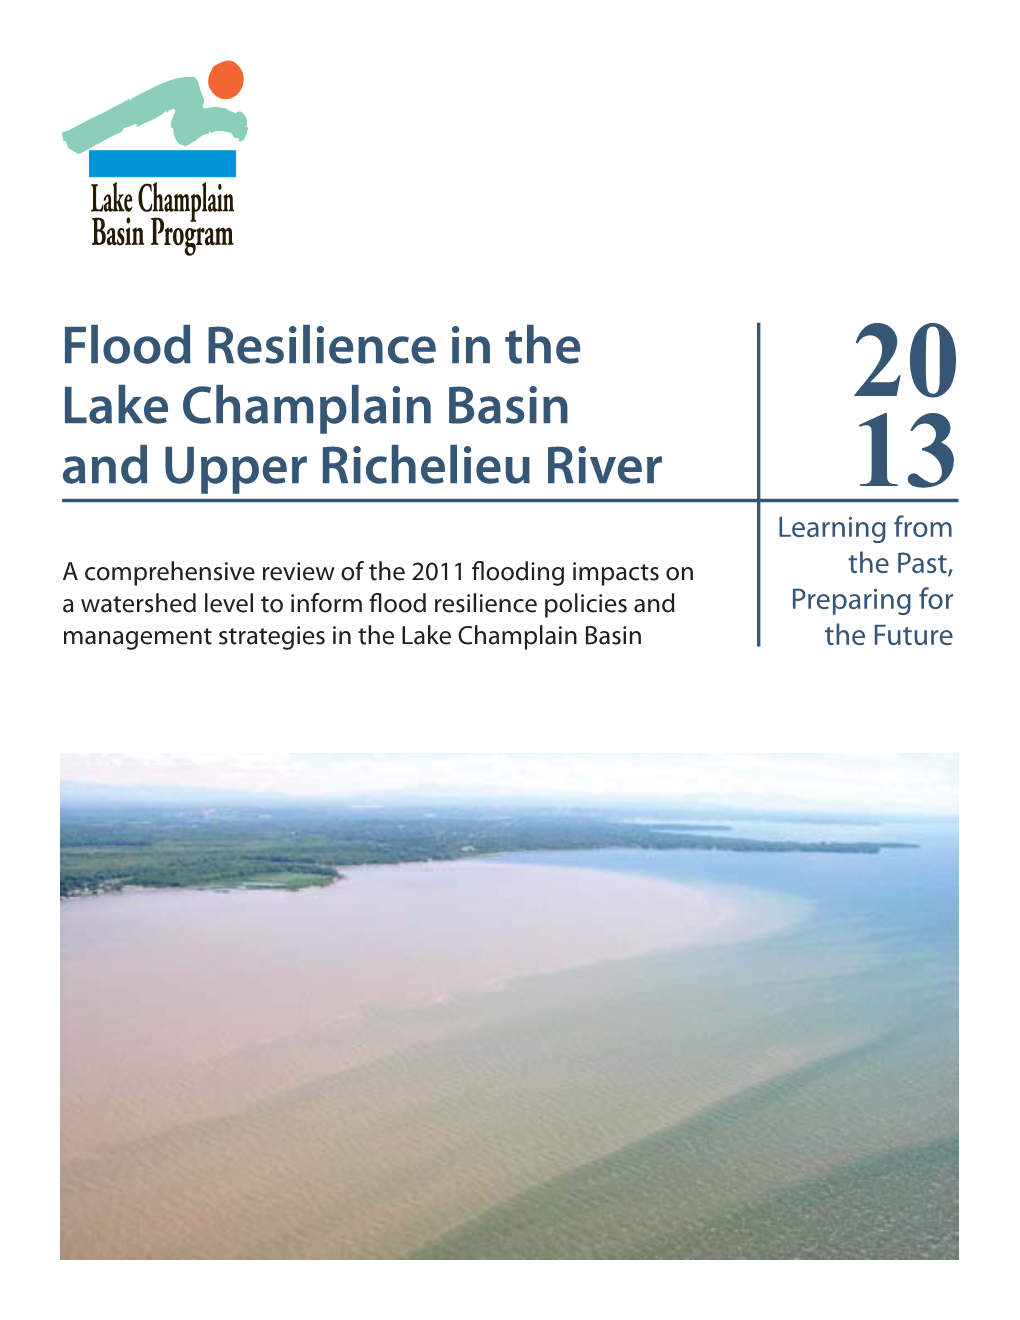 Flood Resilience in the Lake Champlain Basin and Upper Richelieu River